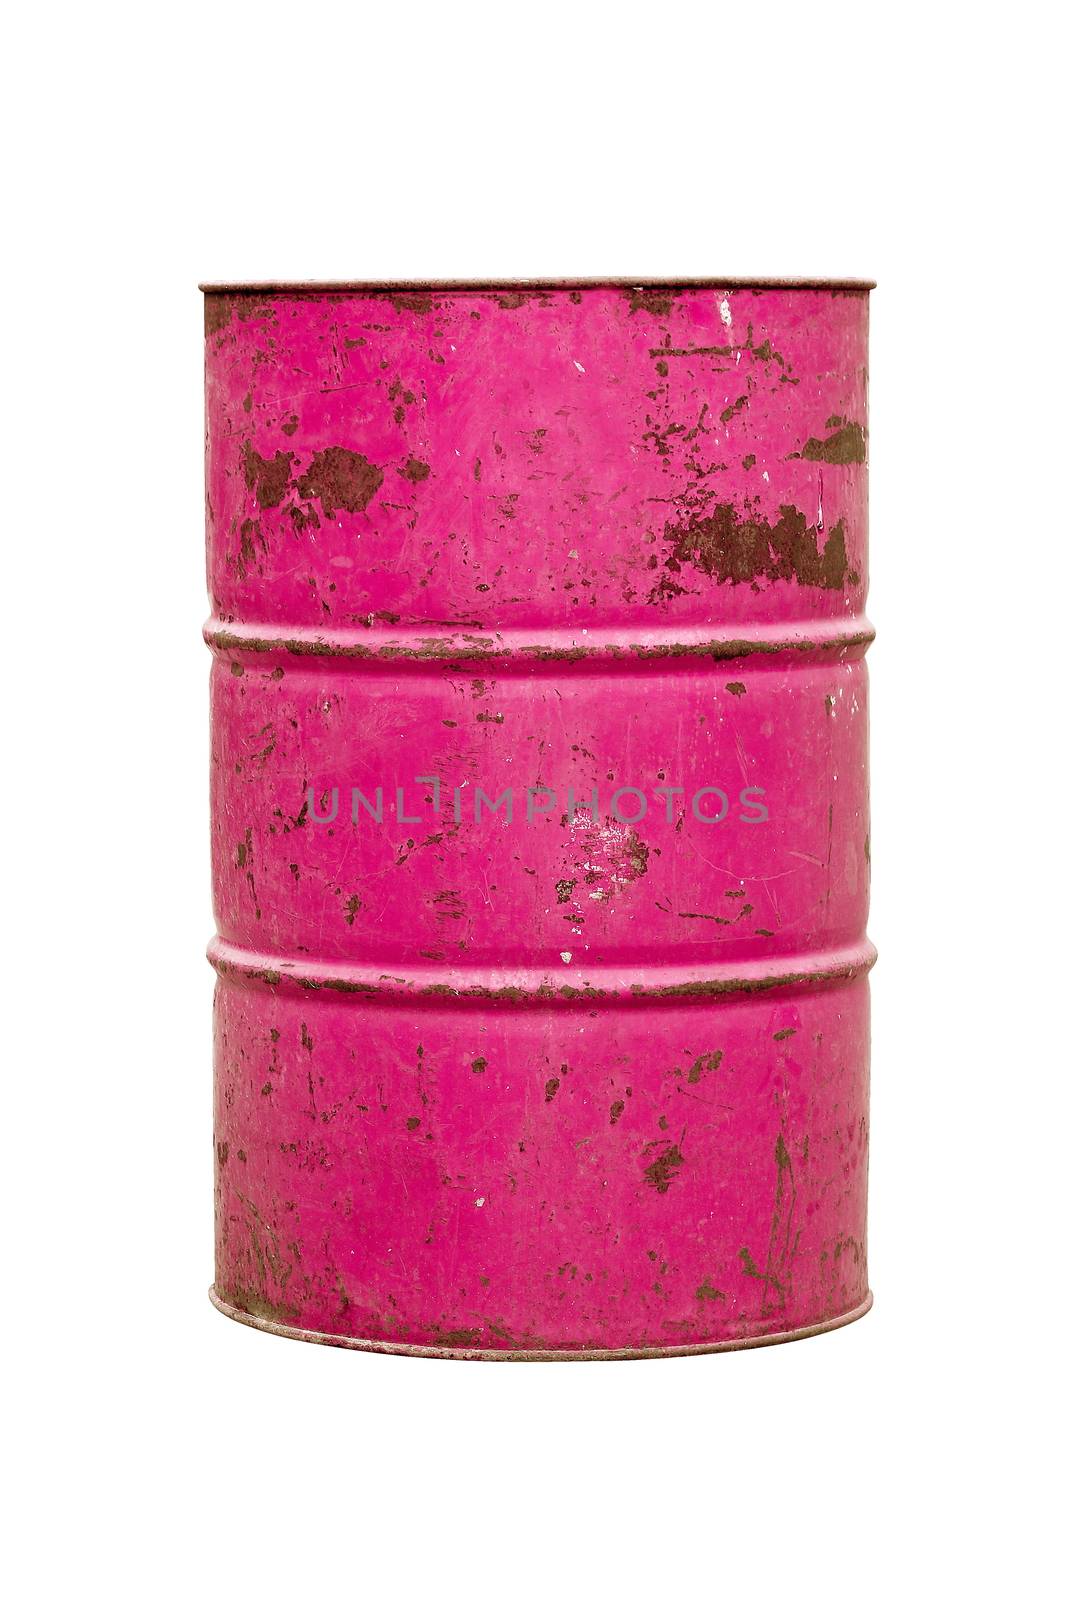 Barrel Oil pink Old isolated on background white by cgdeaw